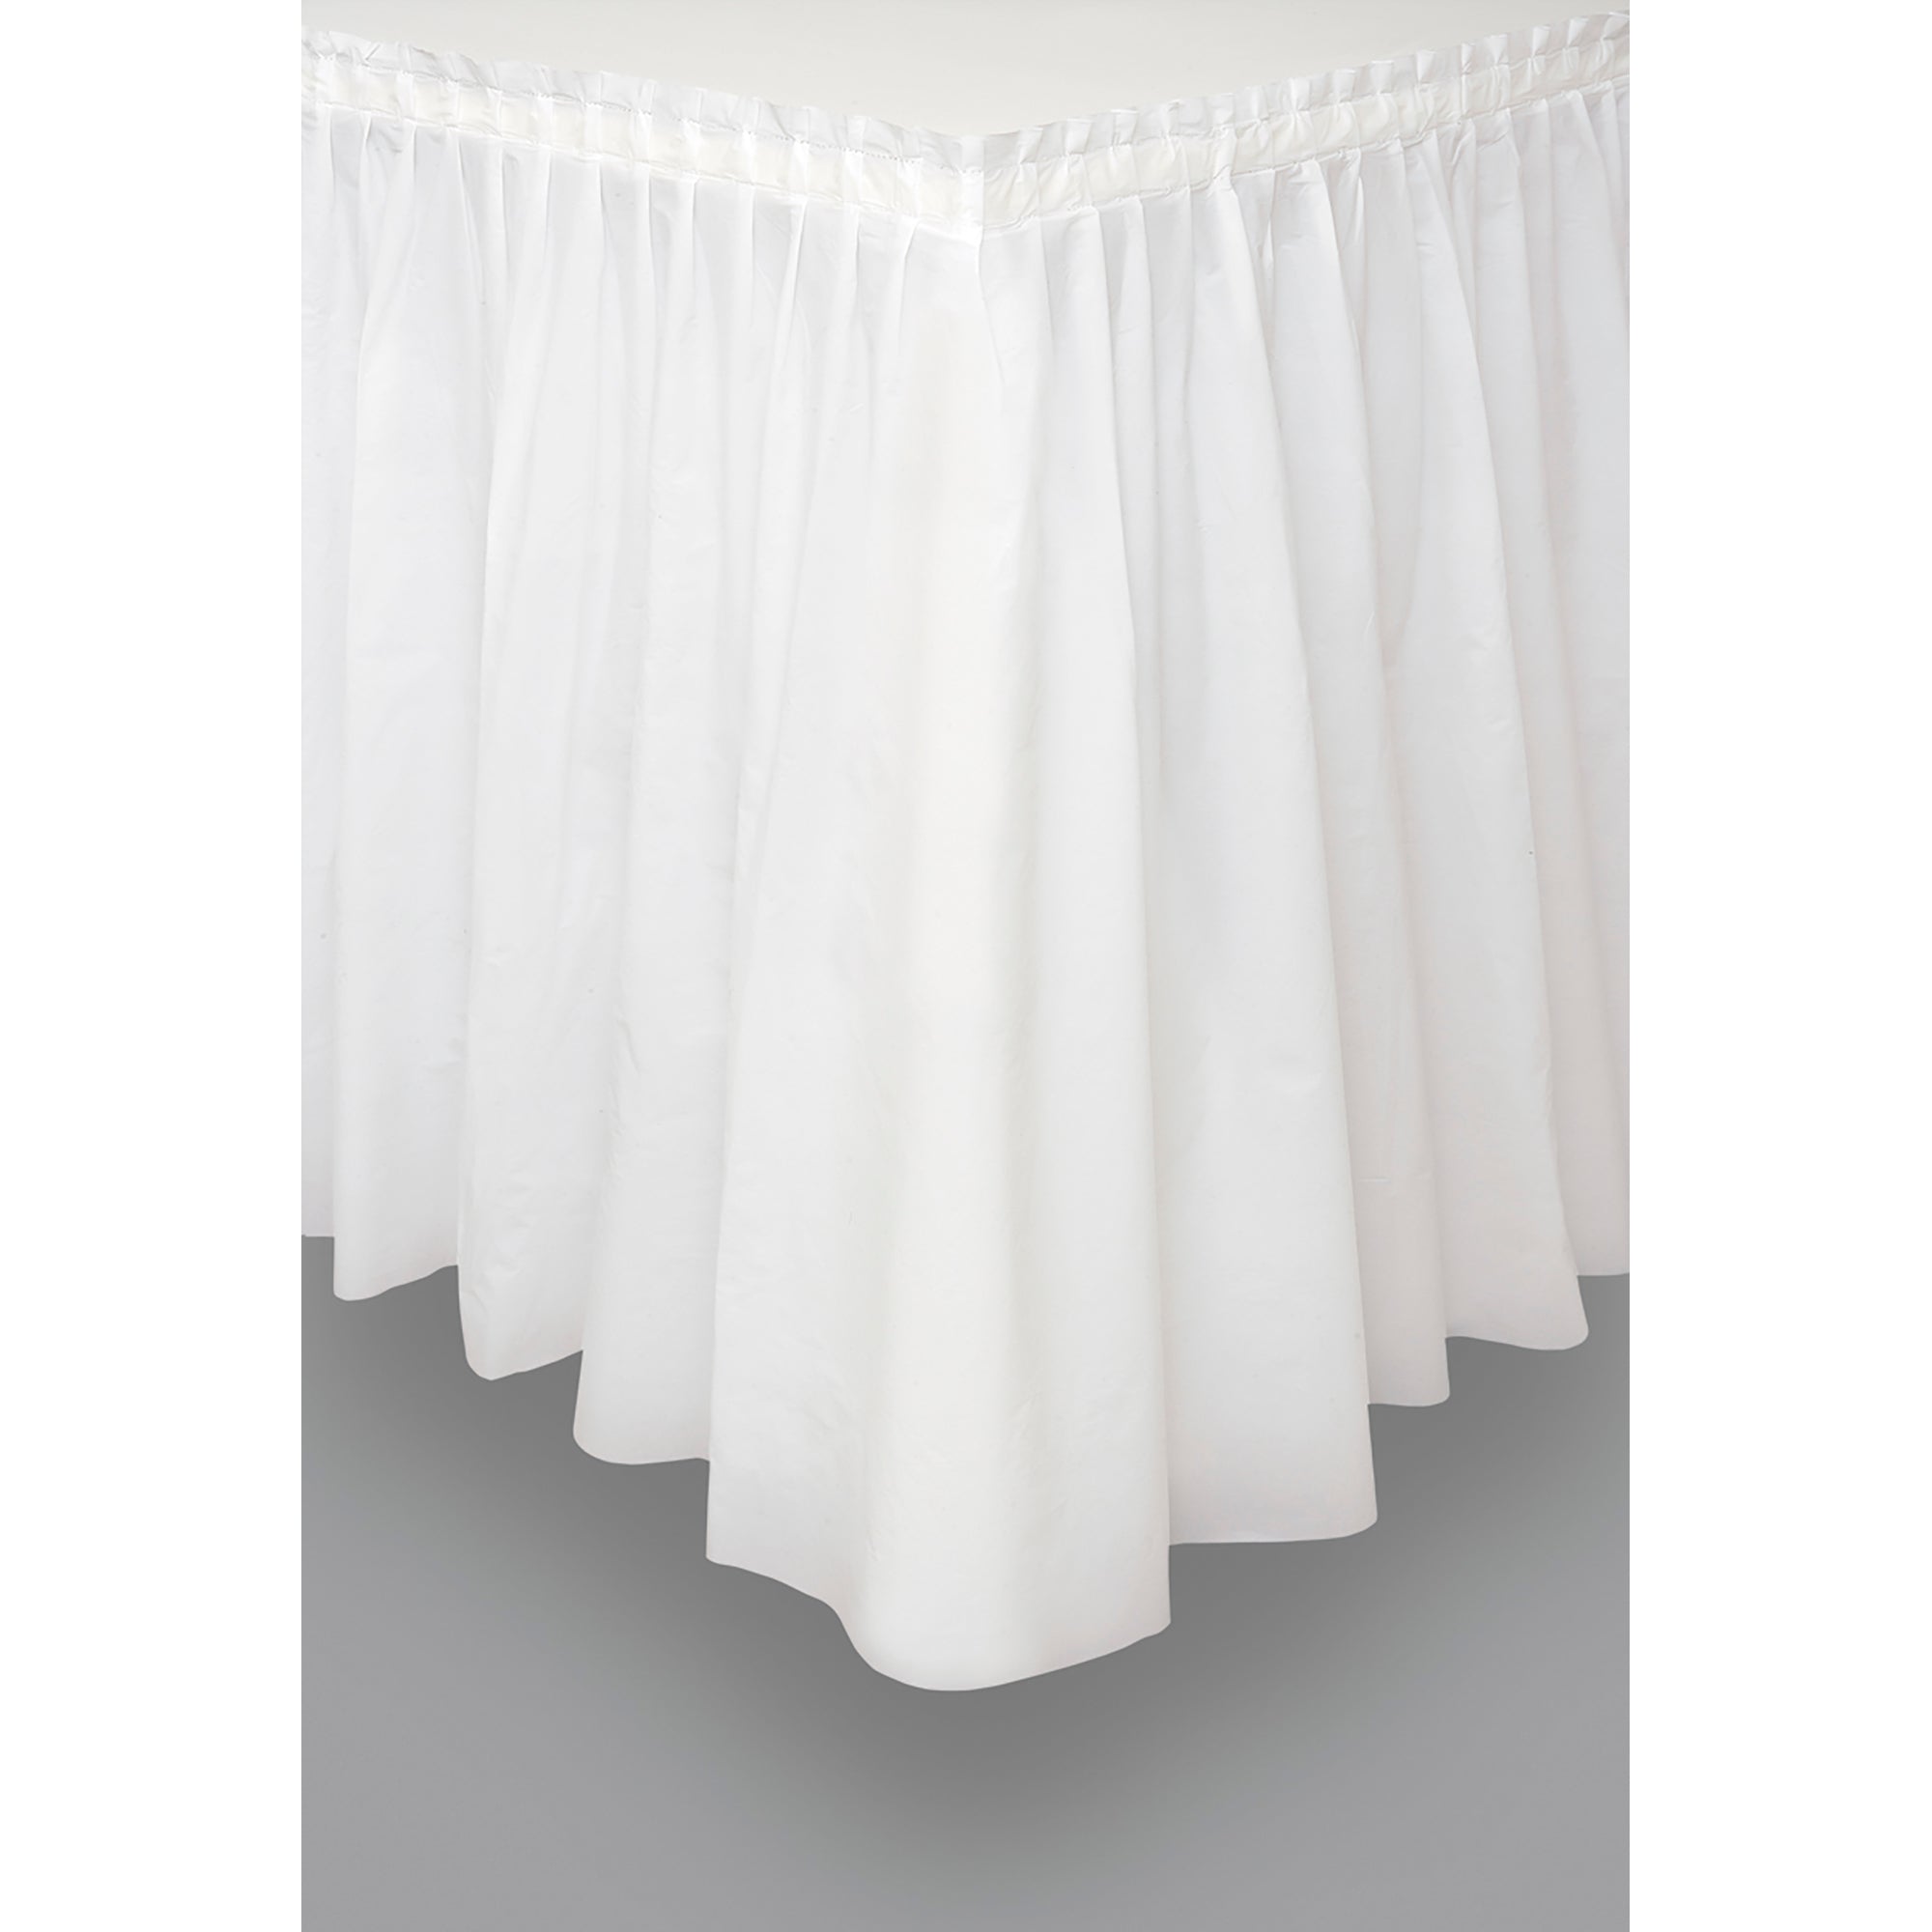 Plastic Tableskirt Bright White with Adhesive Strip Backing 14ft x 29in